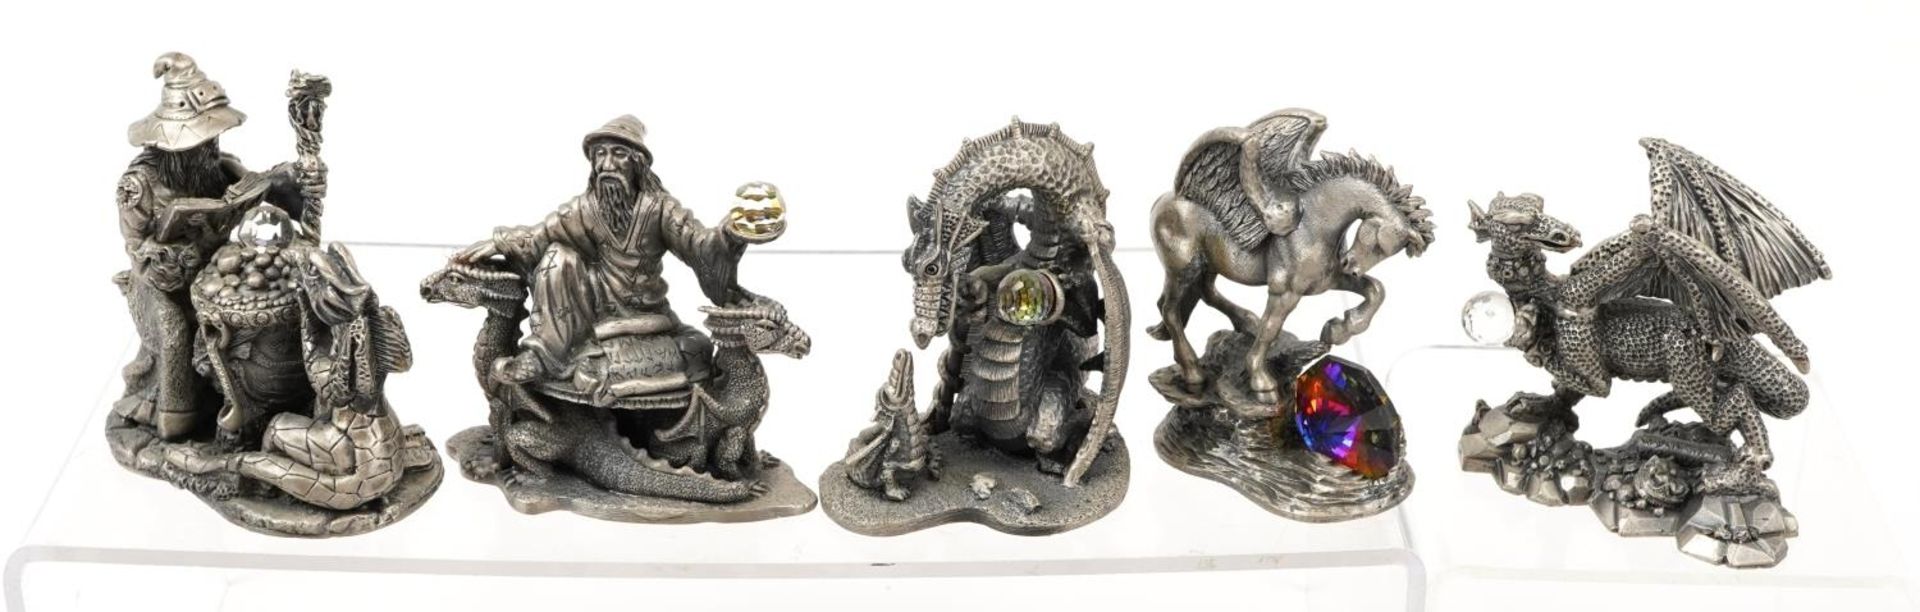 Twenty Myth & Magic pewter figures including Collector's Club and exhibition pieces, the largest 9. - Image 2 of 5